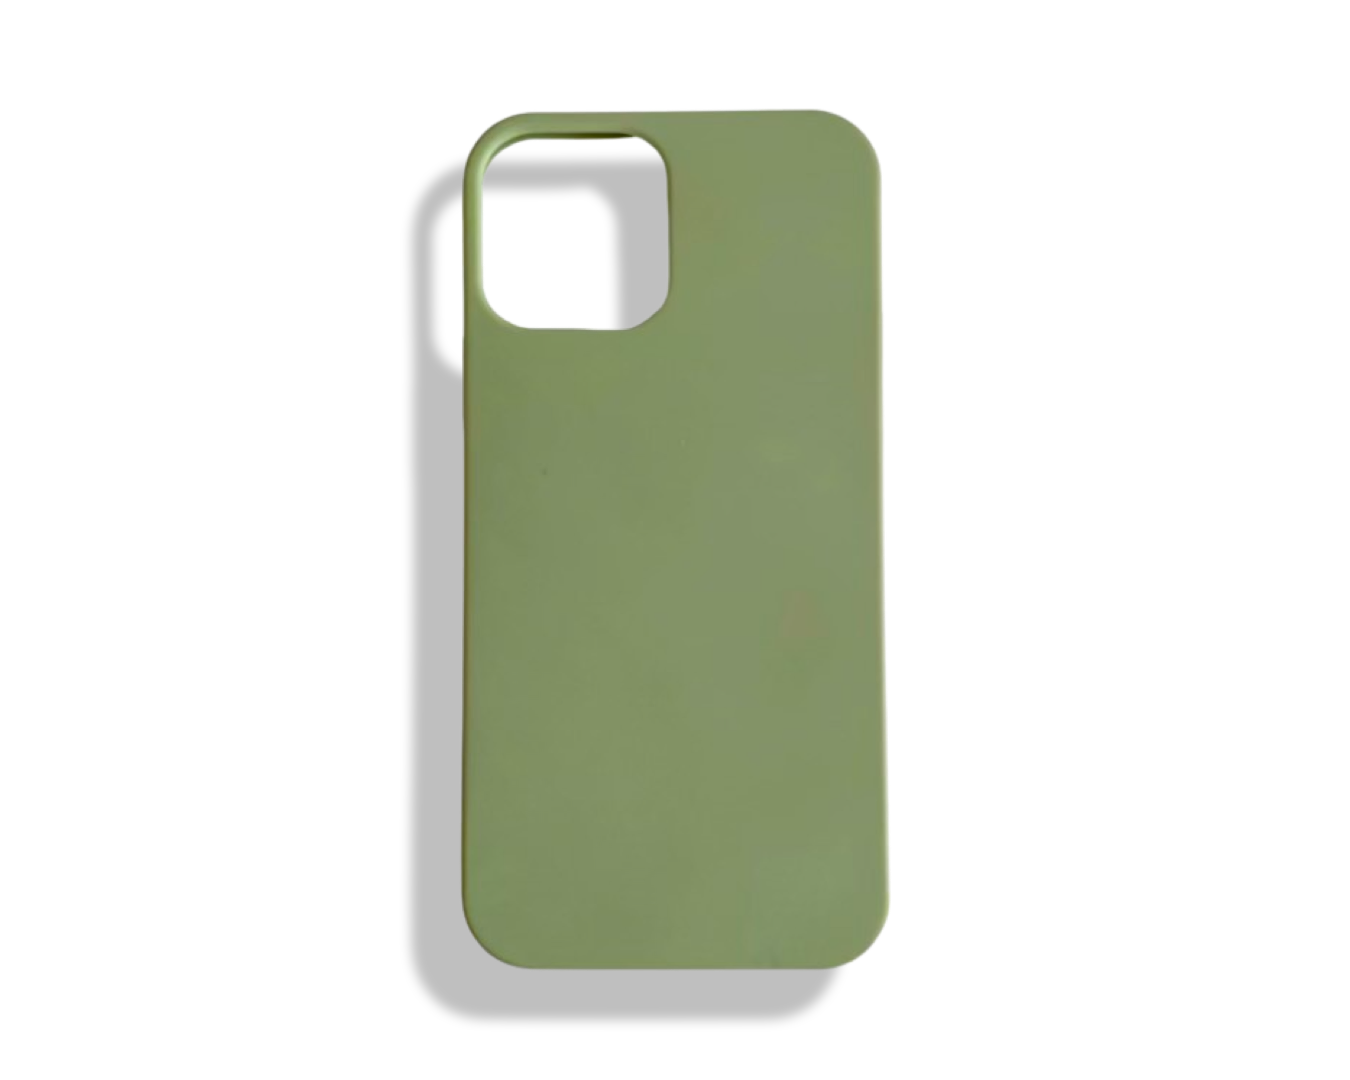 Olive green phone case